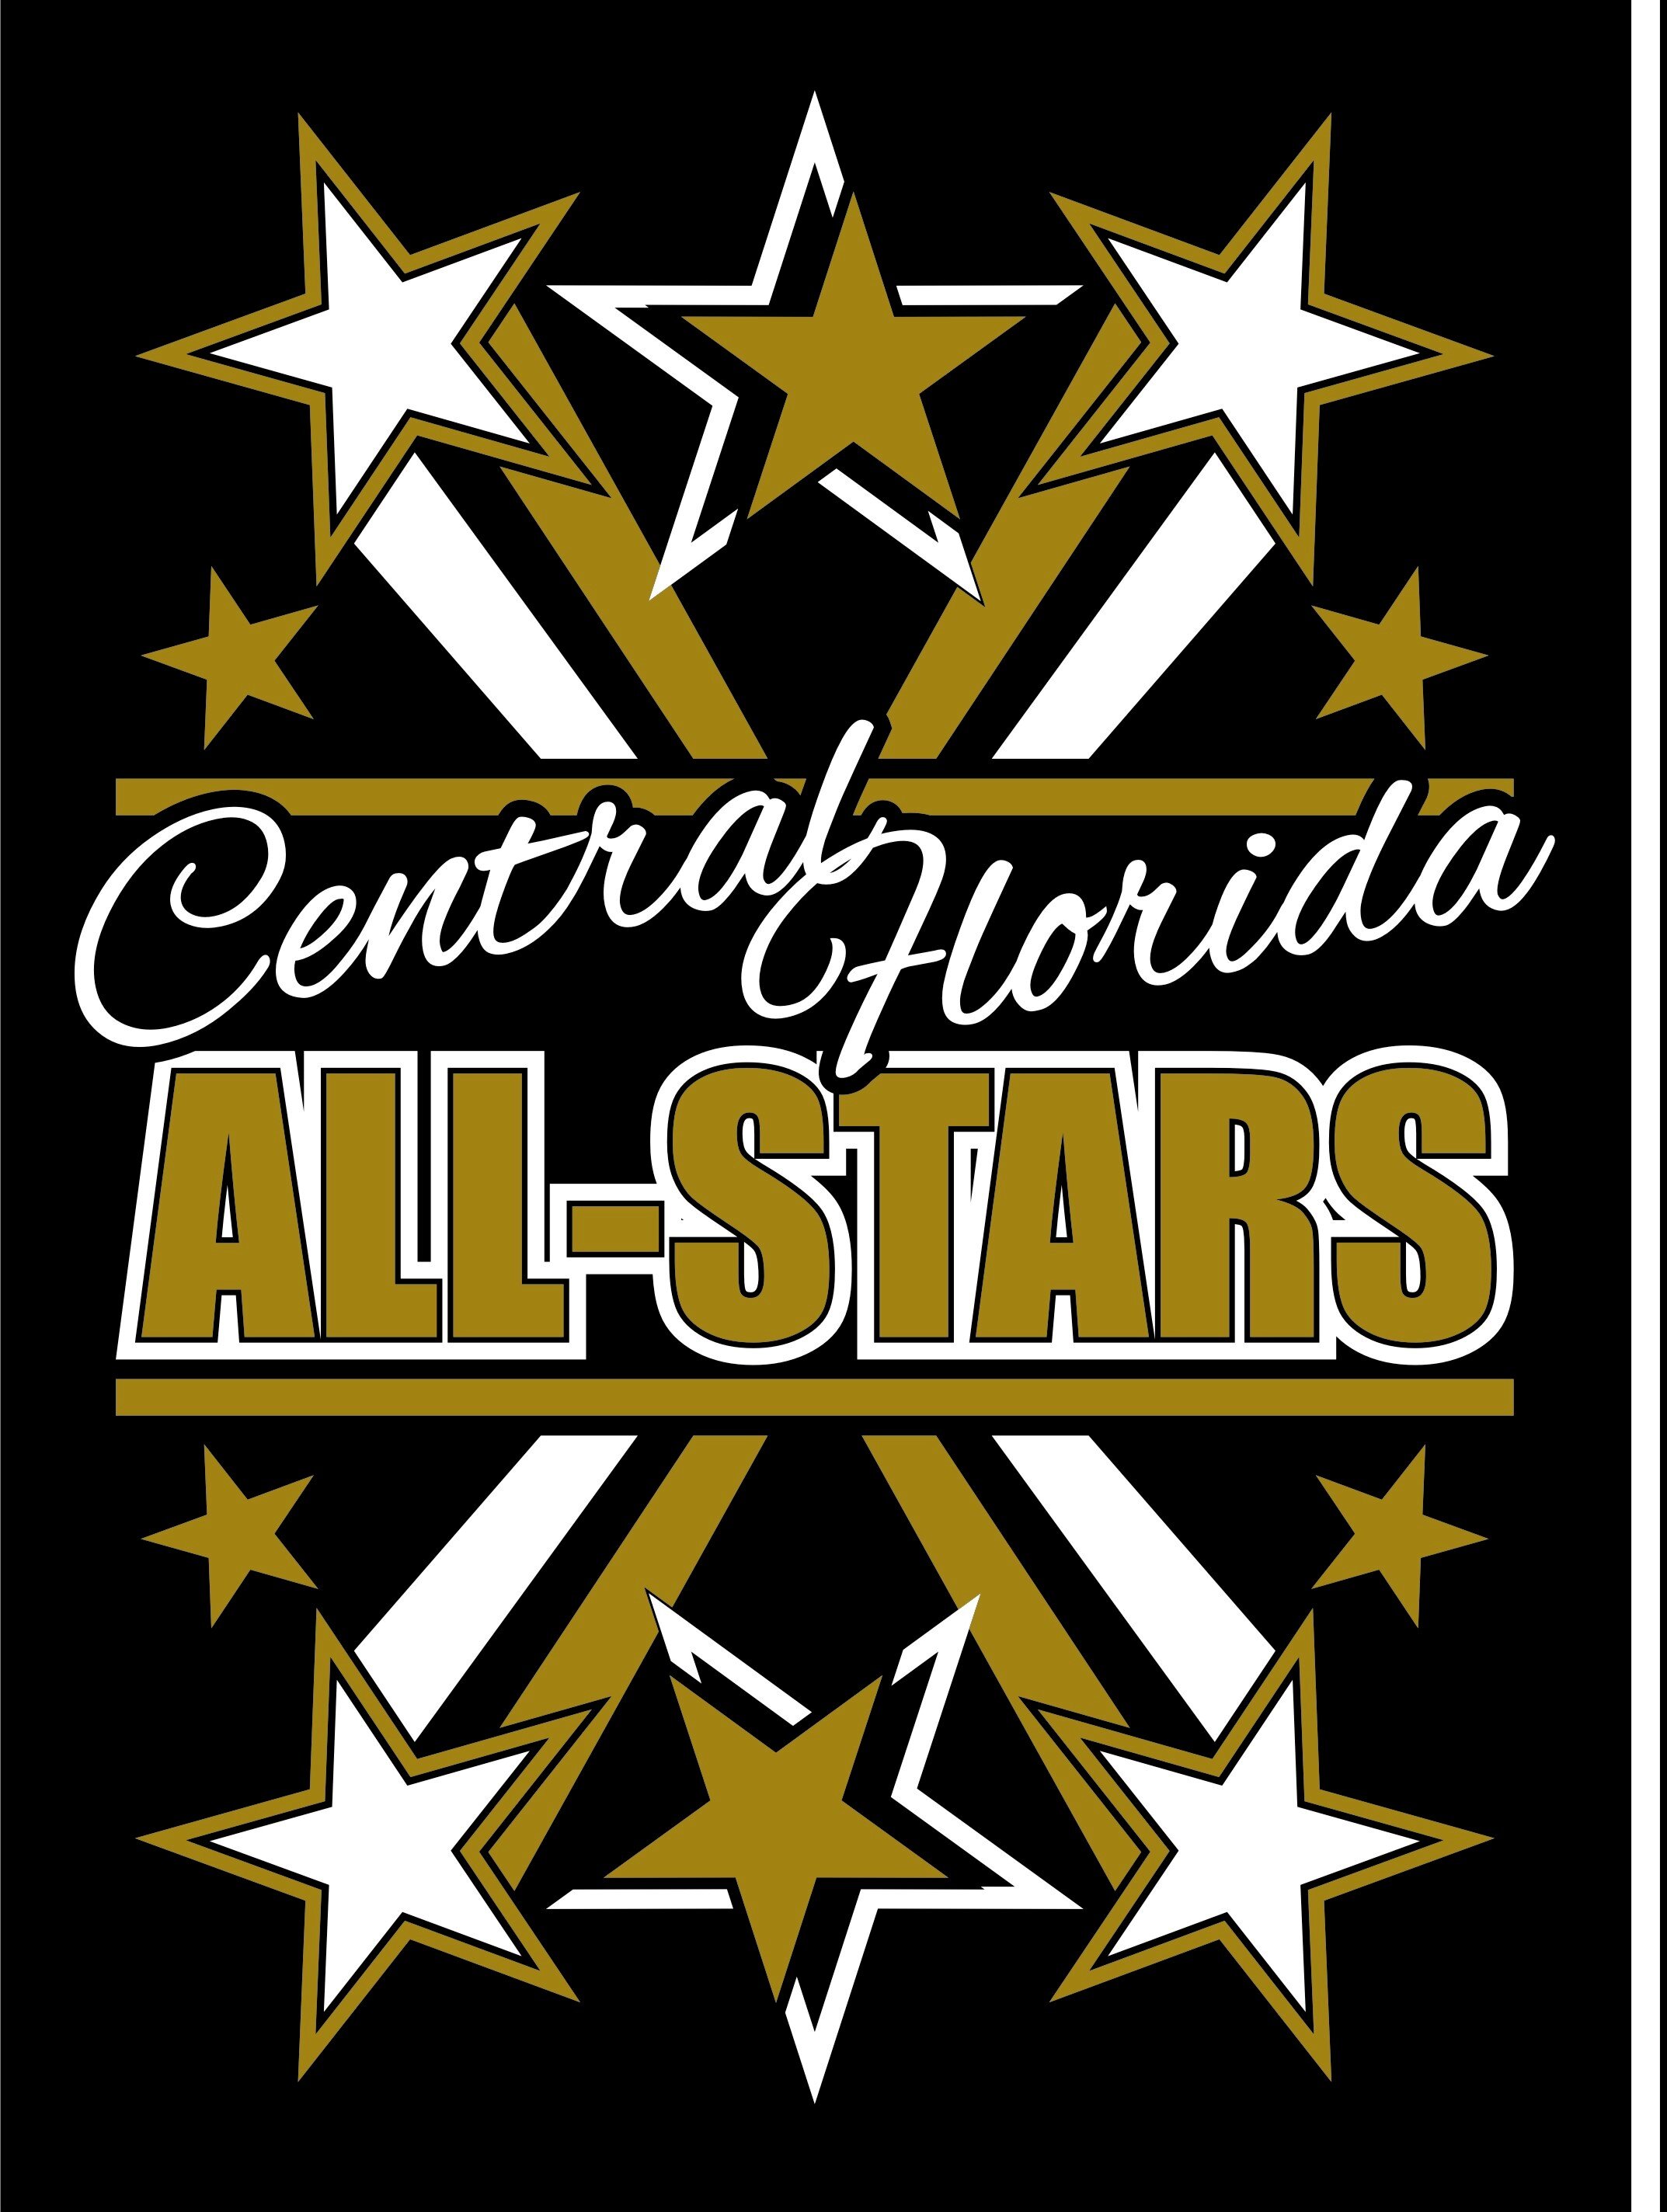 Central Florida All-stars is a Competitive All star cheerleading facility. We are located in Orlando Florida right off of Boggy Creek road! More info to come!